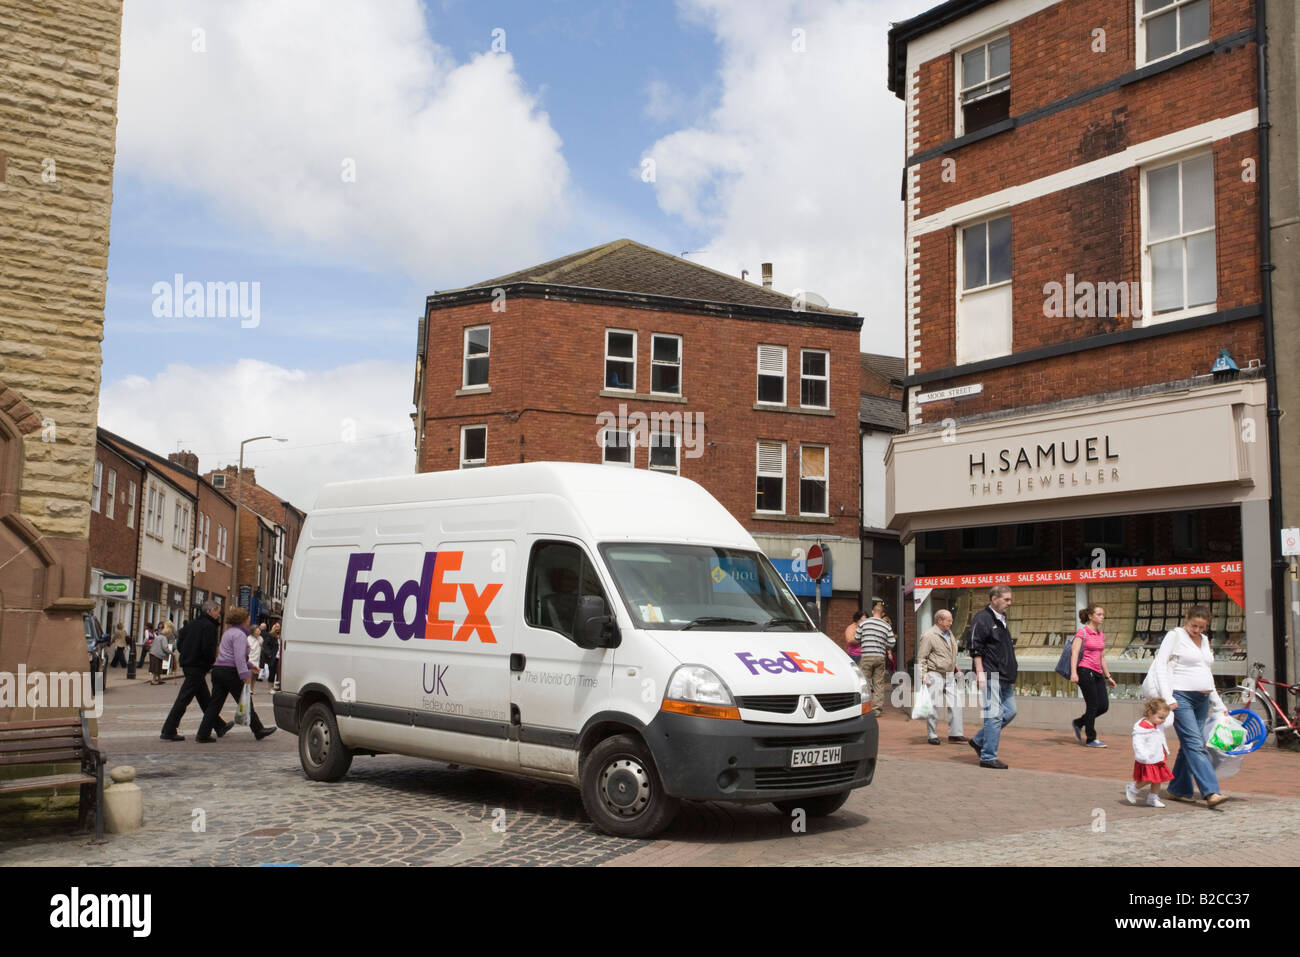 FedEx white delivery van on pedestrianised street in town shopping centre. Ormskirk Lancashire England UK Britain Stock Photo